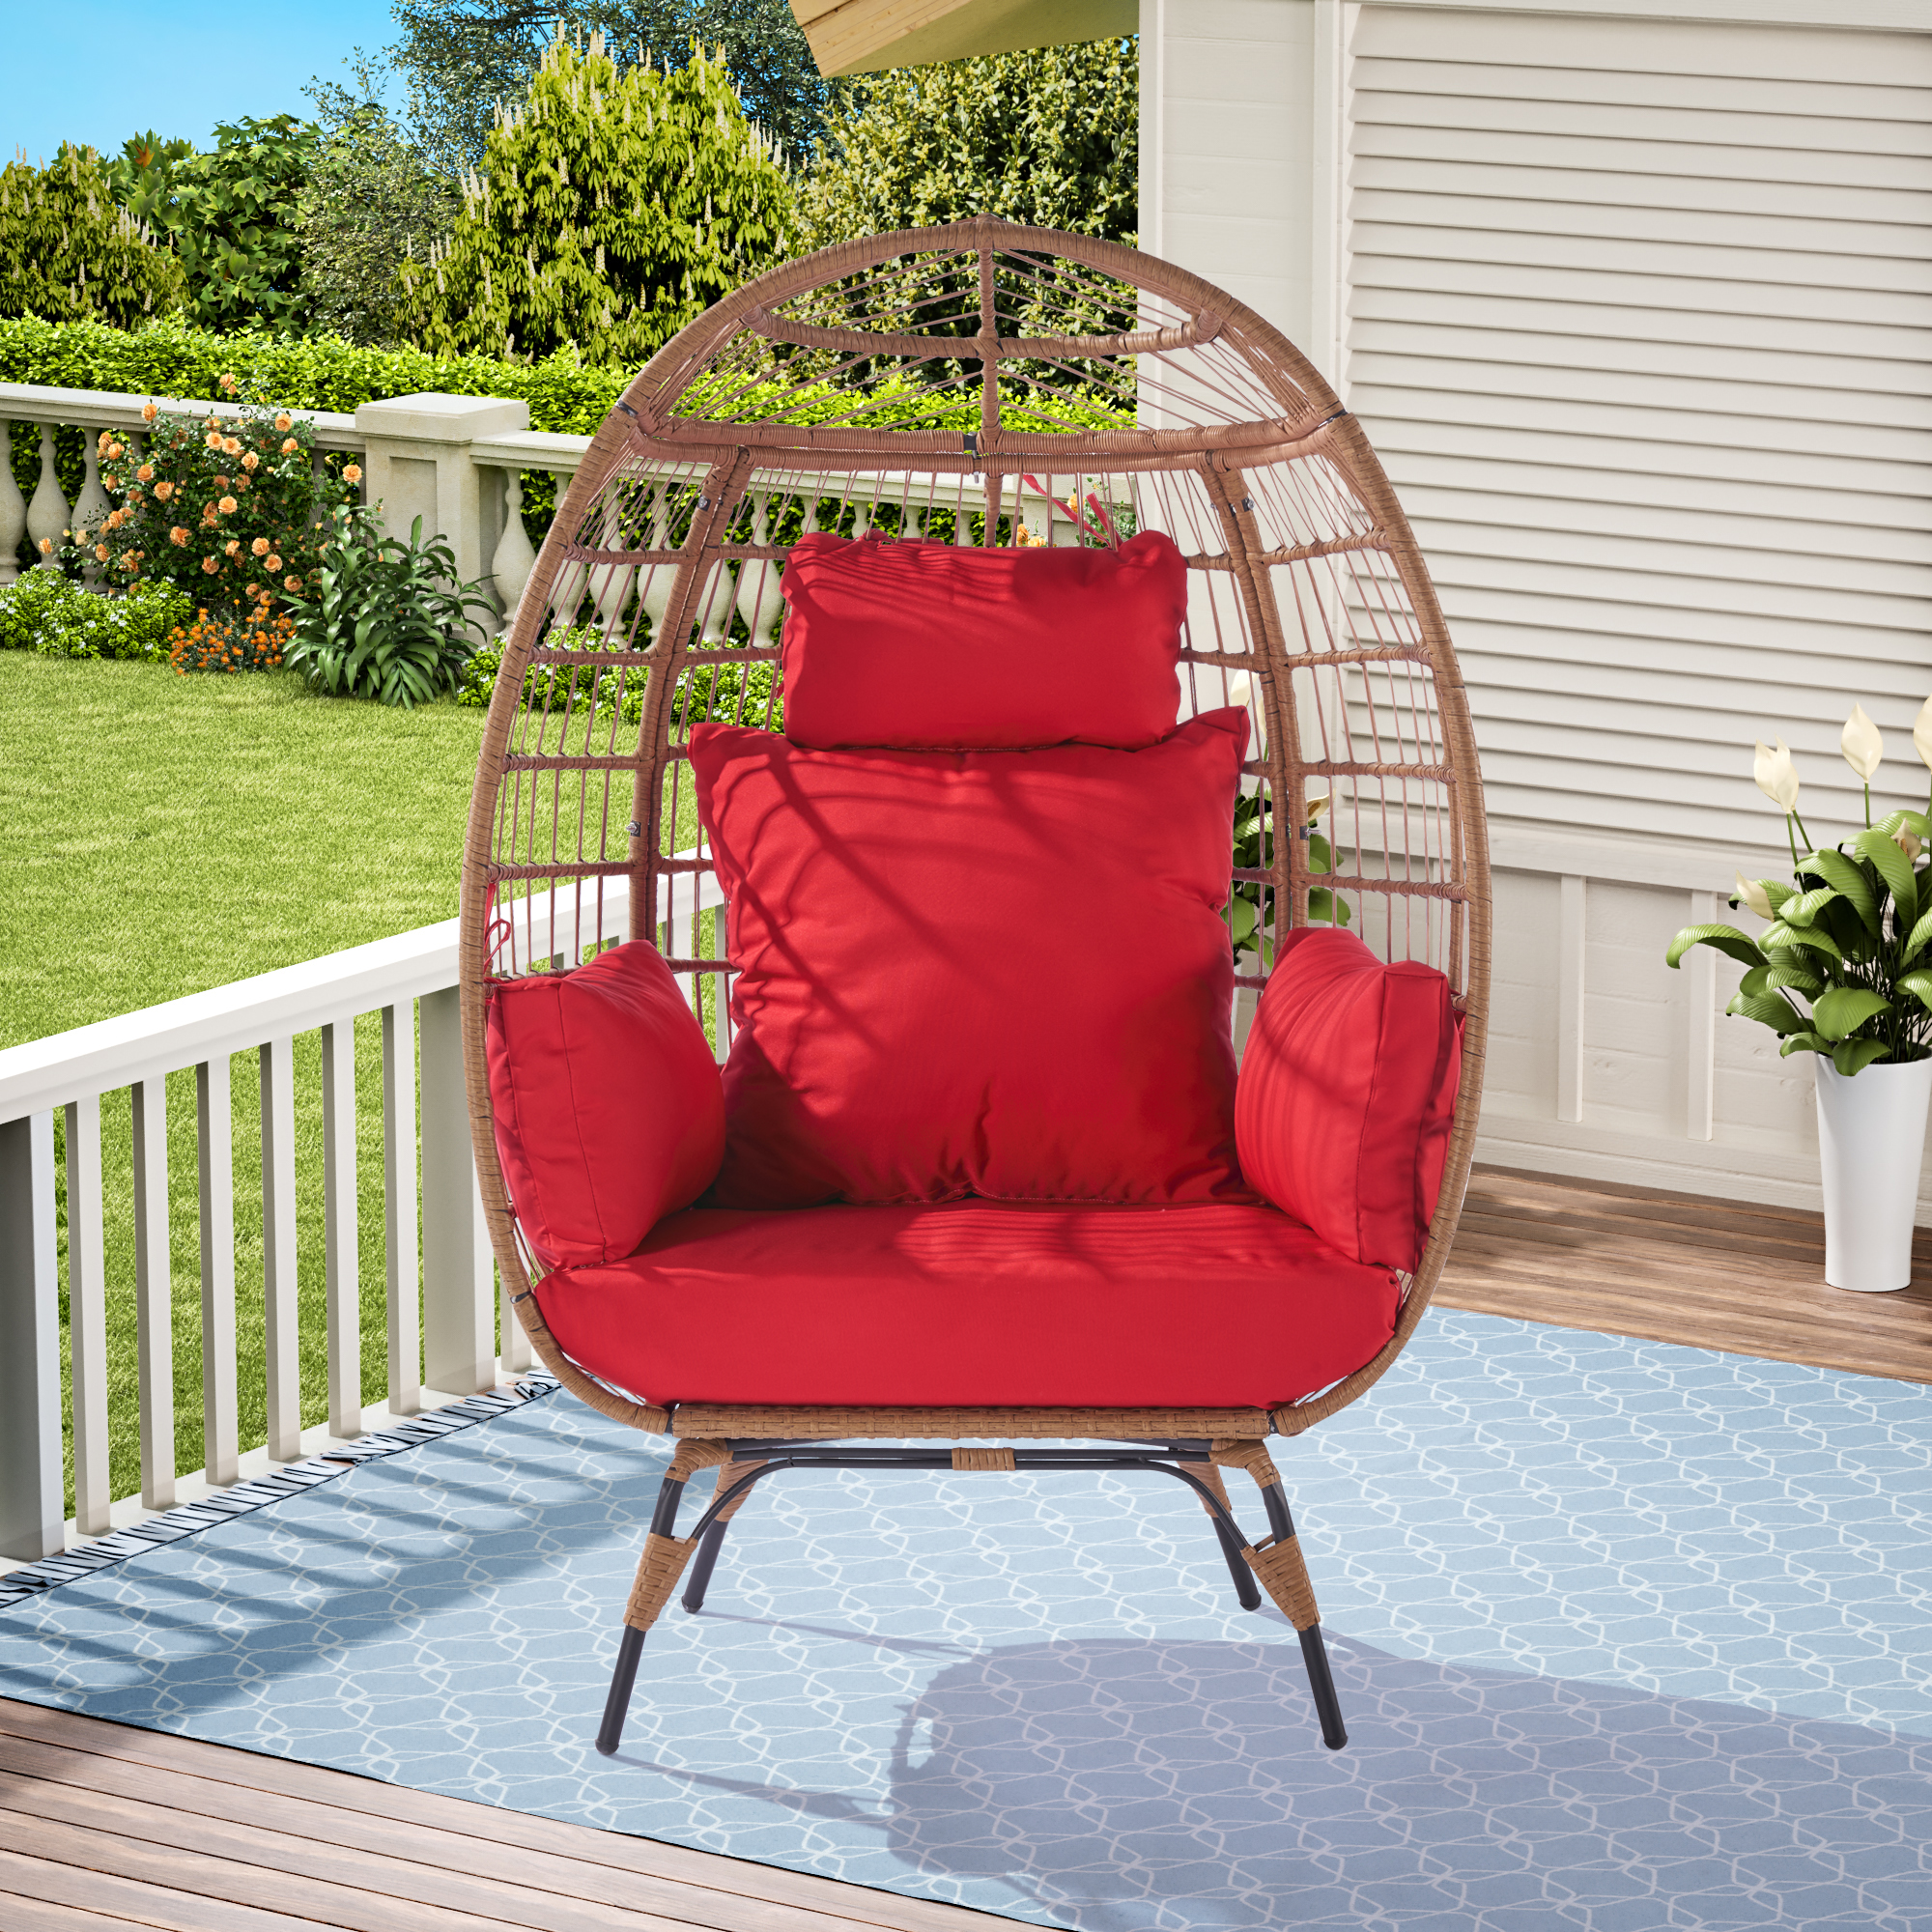 Wicker Egg Chair, Oversized Indoor Outdoor Boho Lounger Chair Stationary Egg Basket Chair, All-Weather 440lb Capacity Patio Chair, Red - image 1 of 9